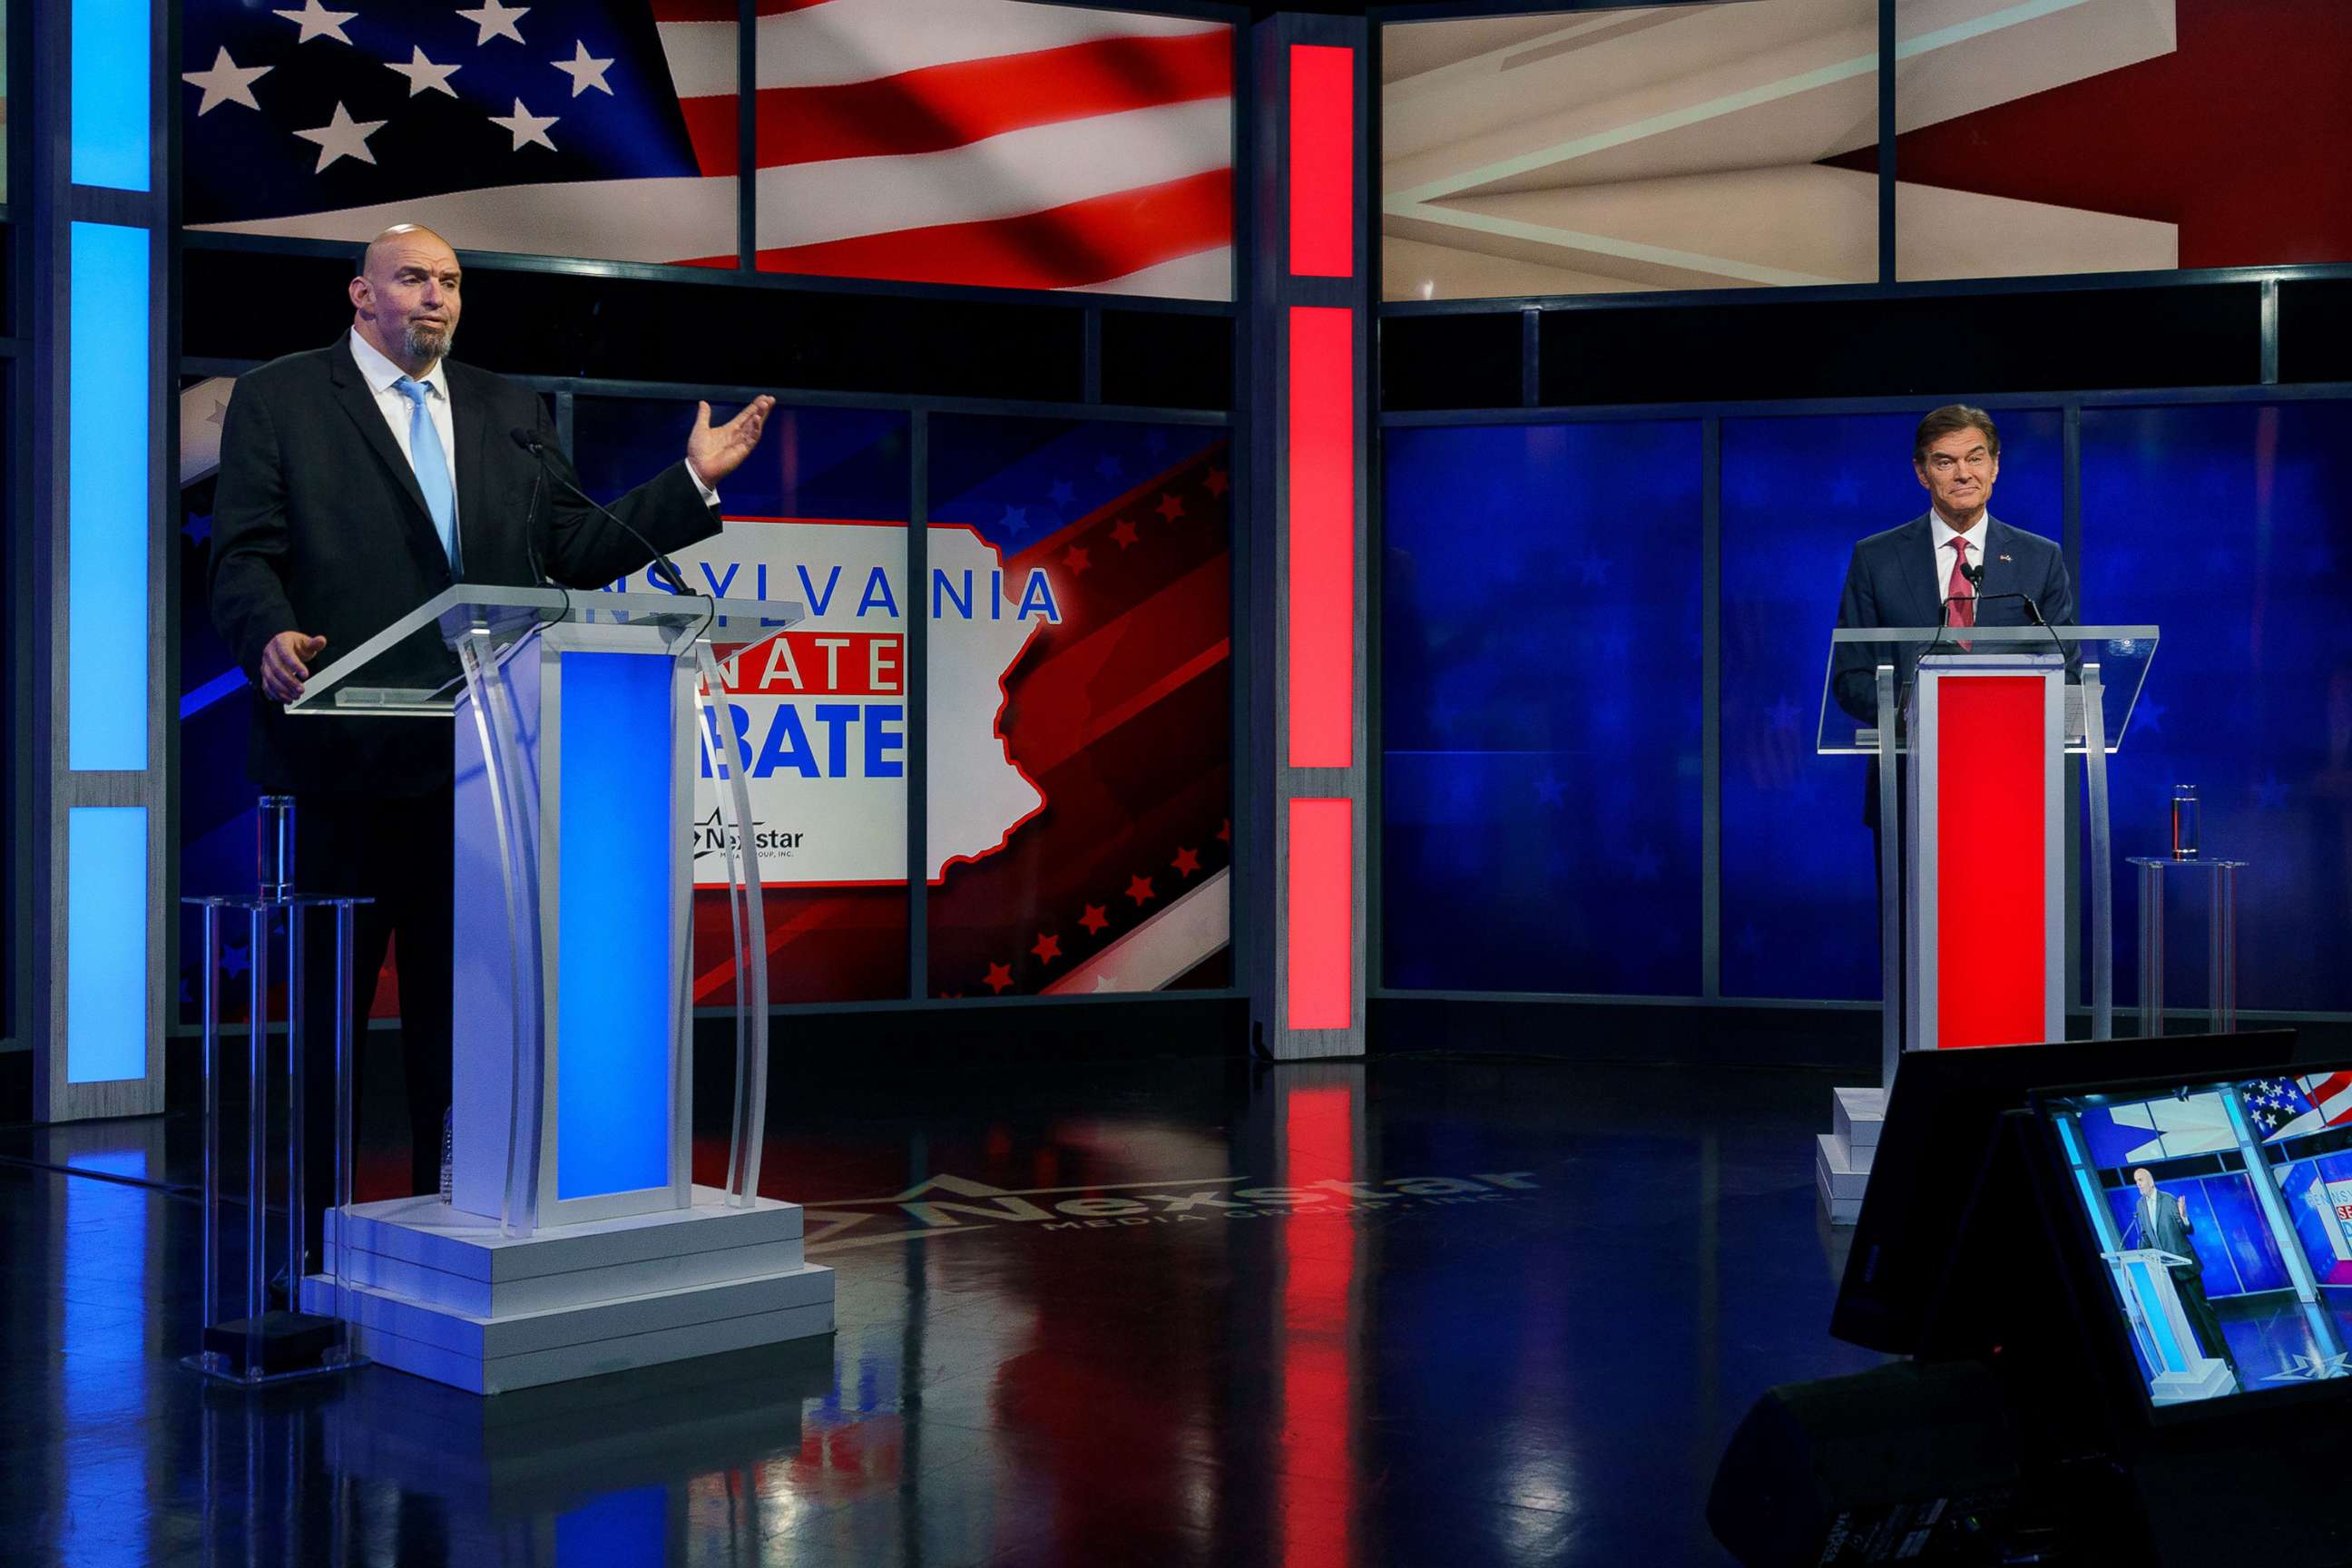 PHOTO: A handout photo made available by abc27 shows Democratic candidate Lt. Gov. John Fetterman (L) and Republican Pennsylvania Senate candidate Dr. Mehmet Oz (R) during their debate in Harrisburg, Penn., Oct. 25, 2022.